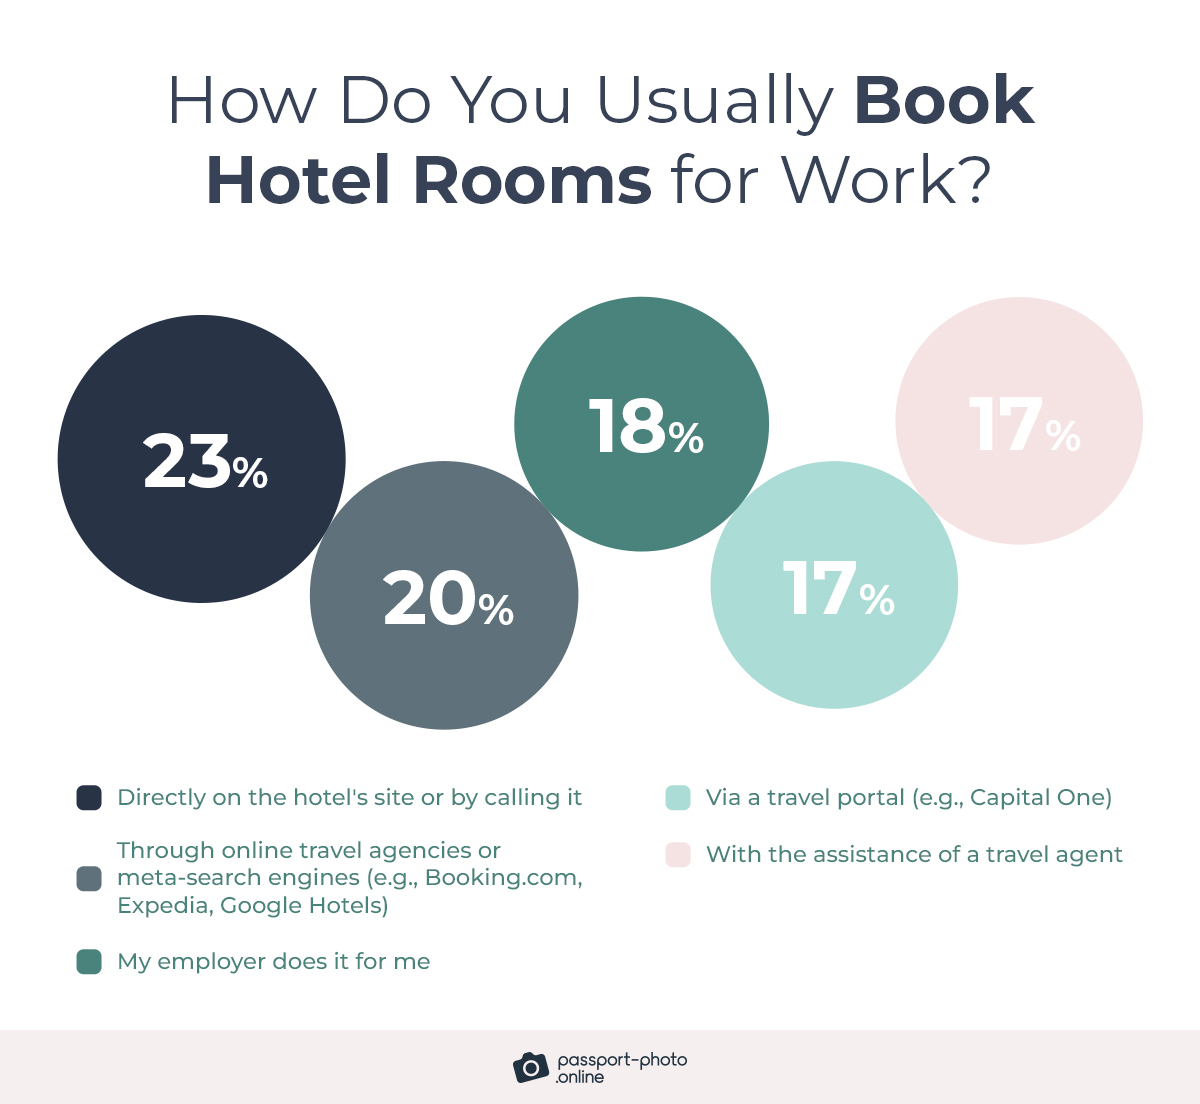 guests usually book hotels for work directly (23%)